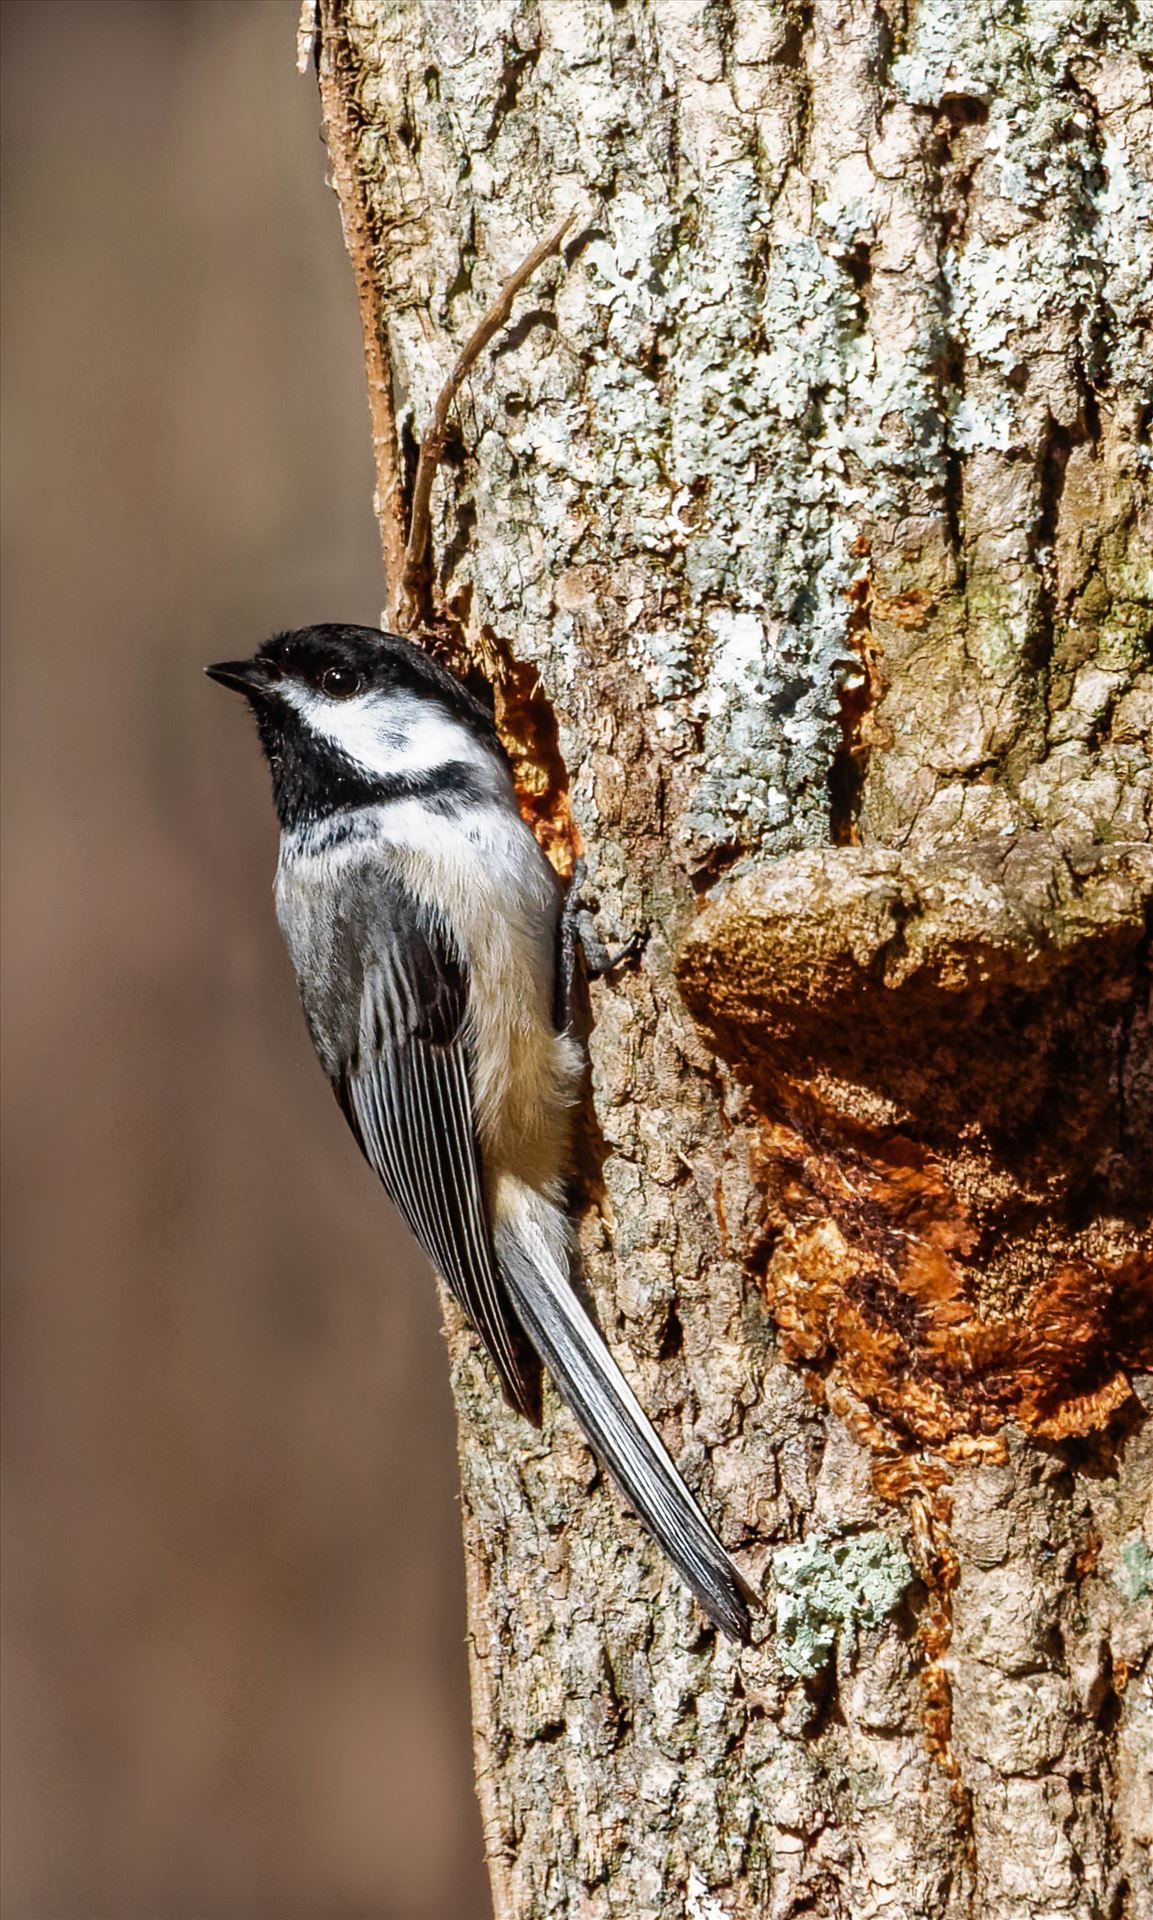 Chickadee Black-Capped Chickadee checking out a Woodpecker Hole by Buckmaster